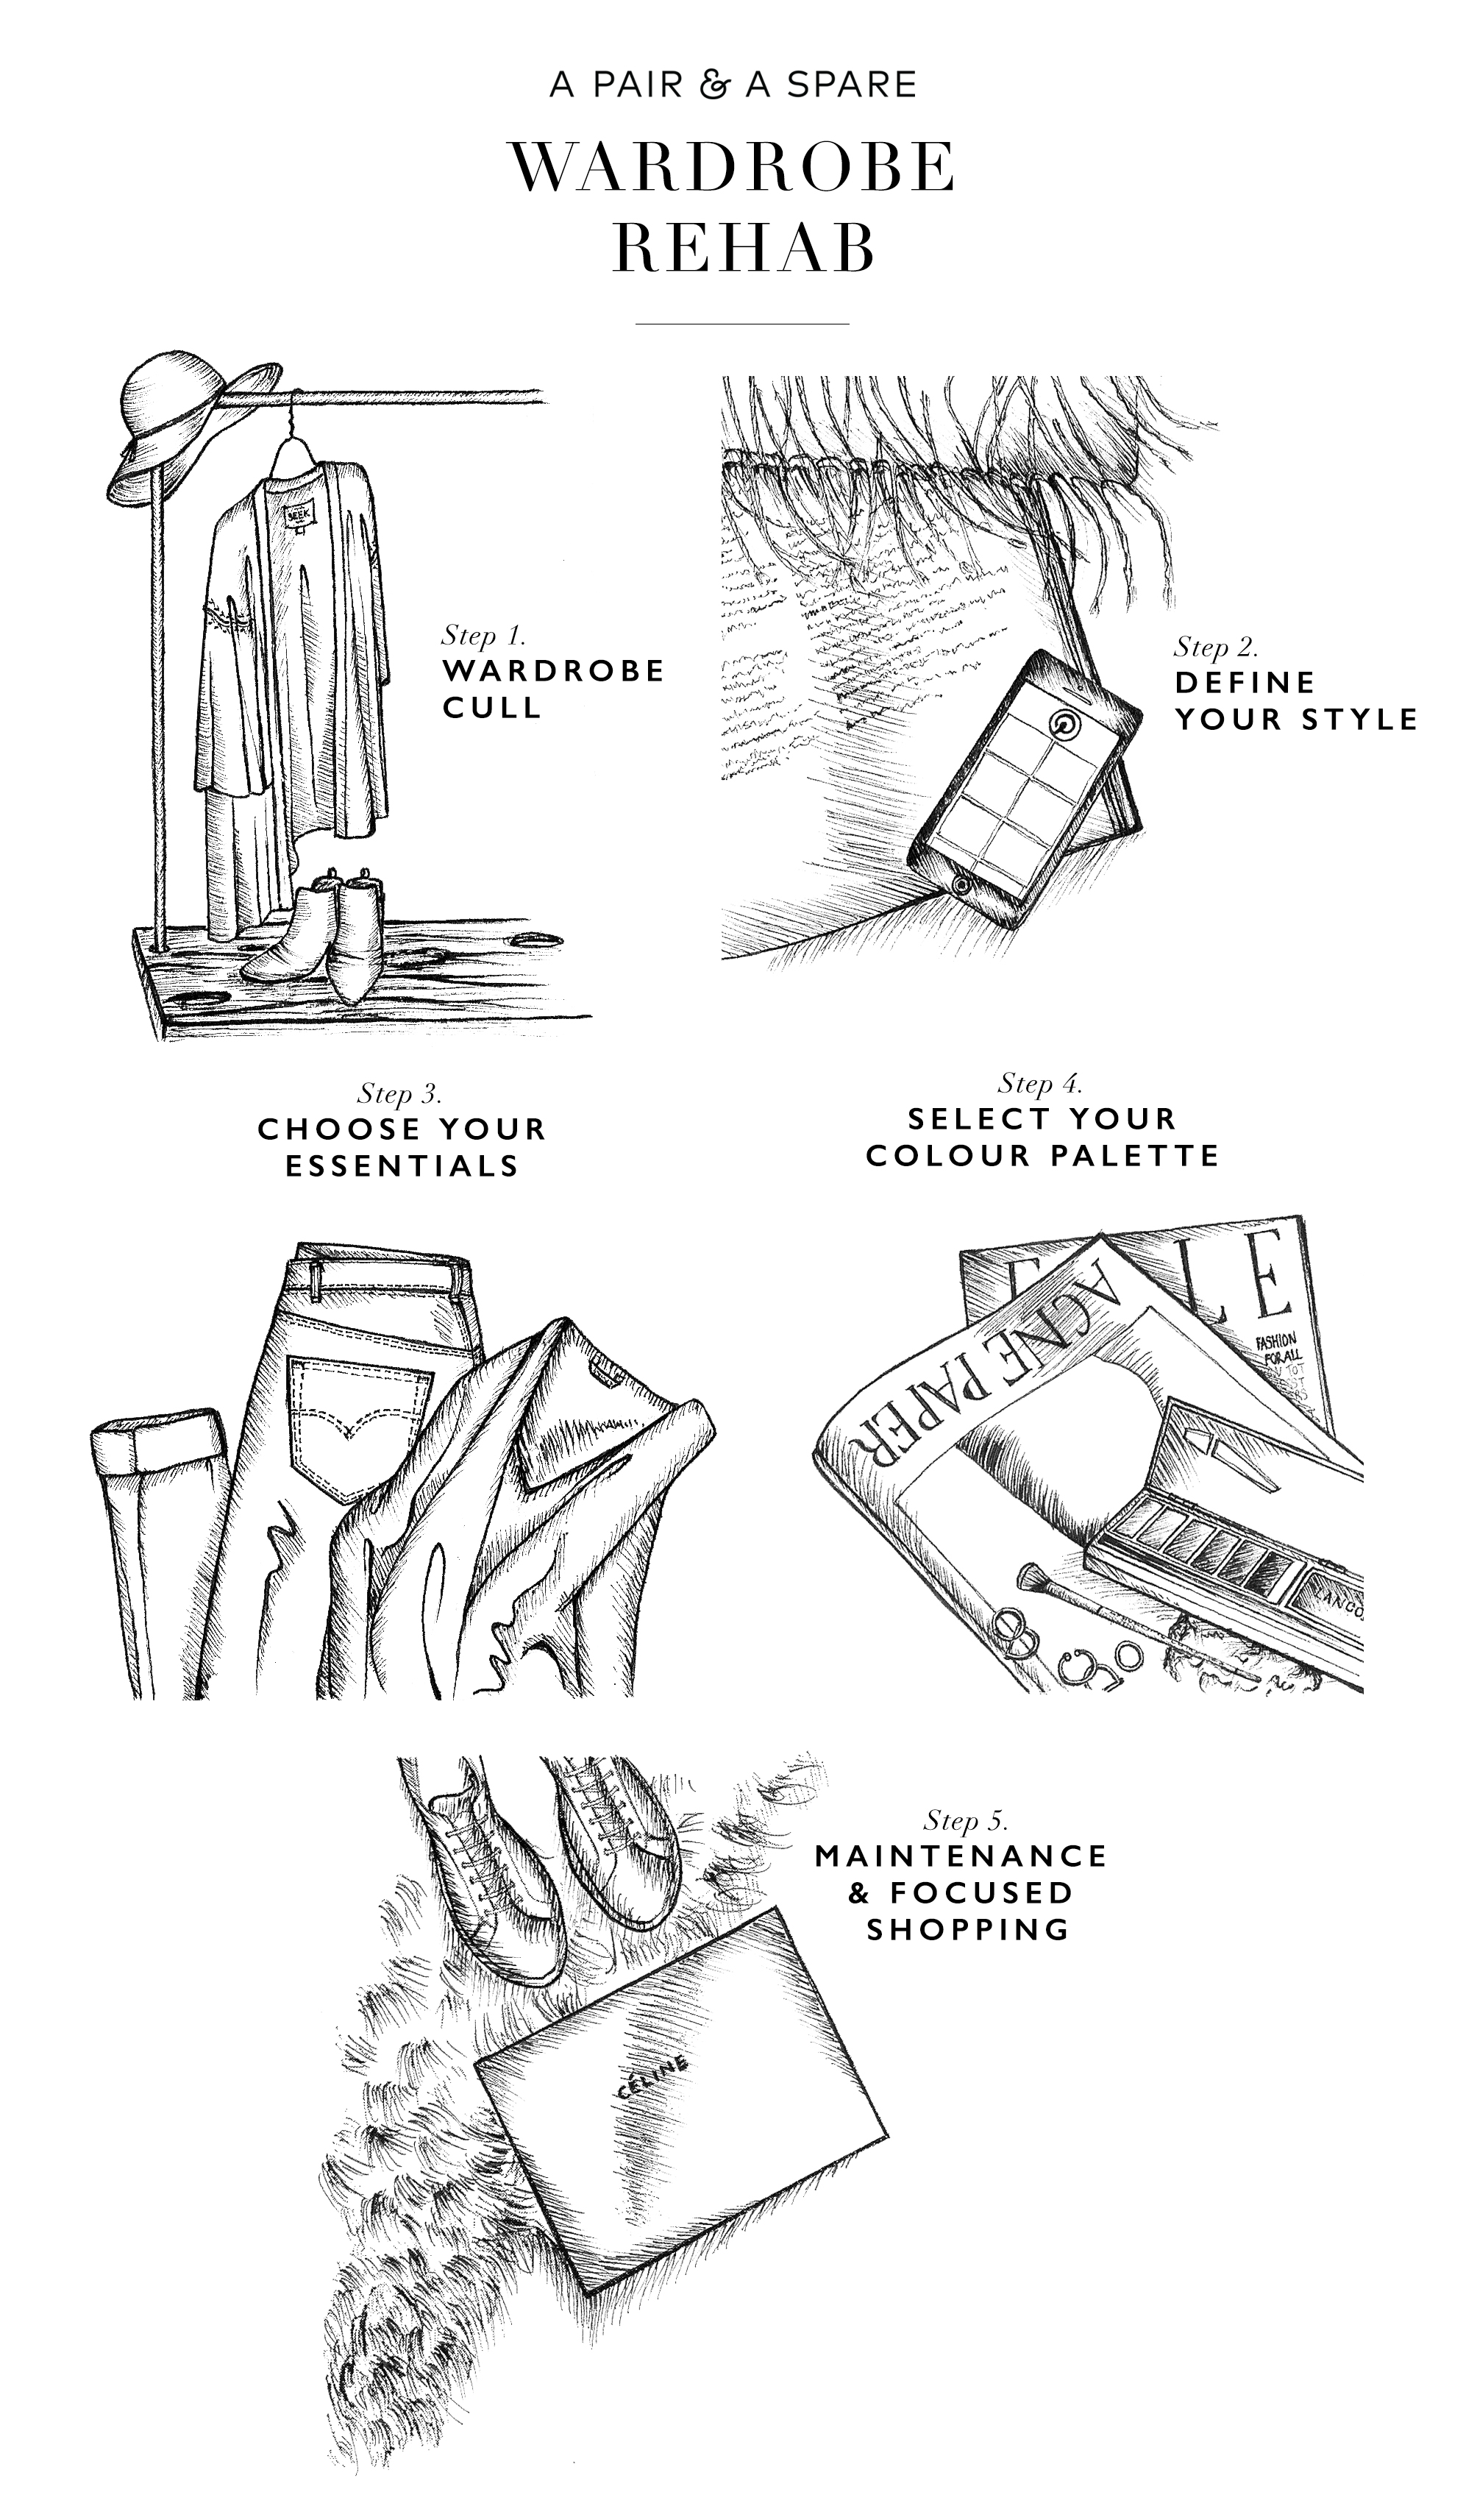 5 Steps To Perfecting Your Closet